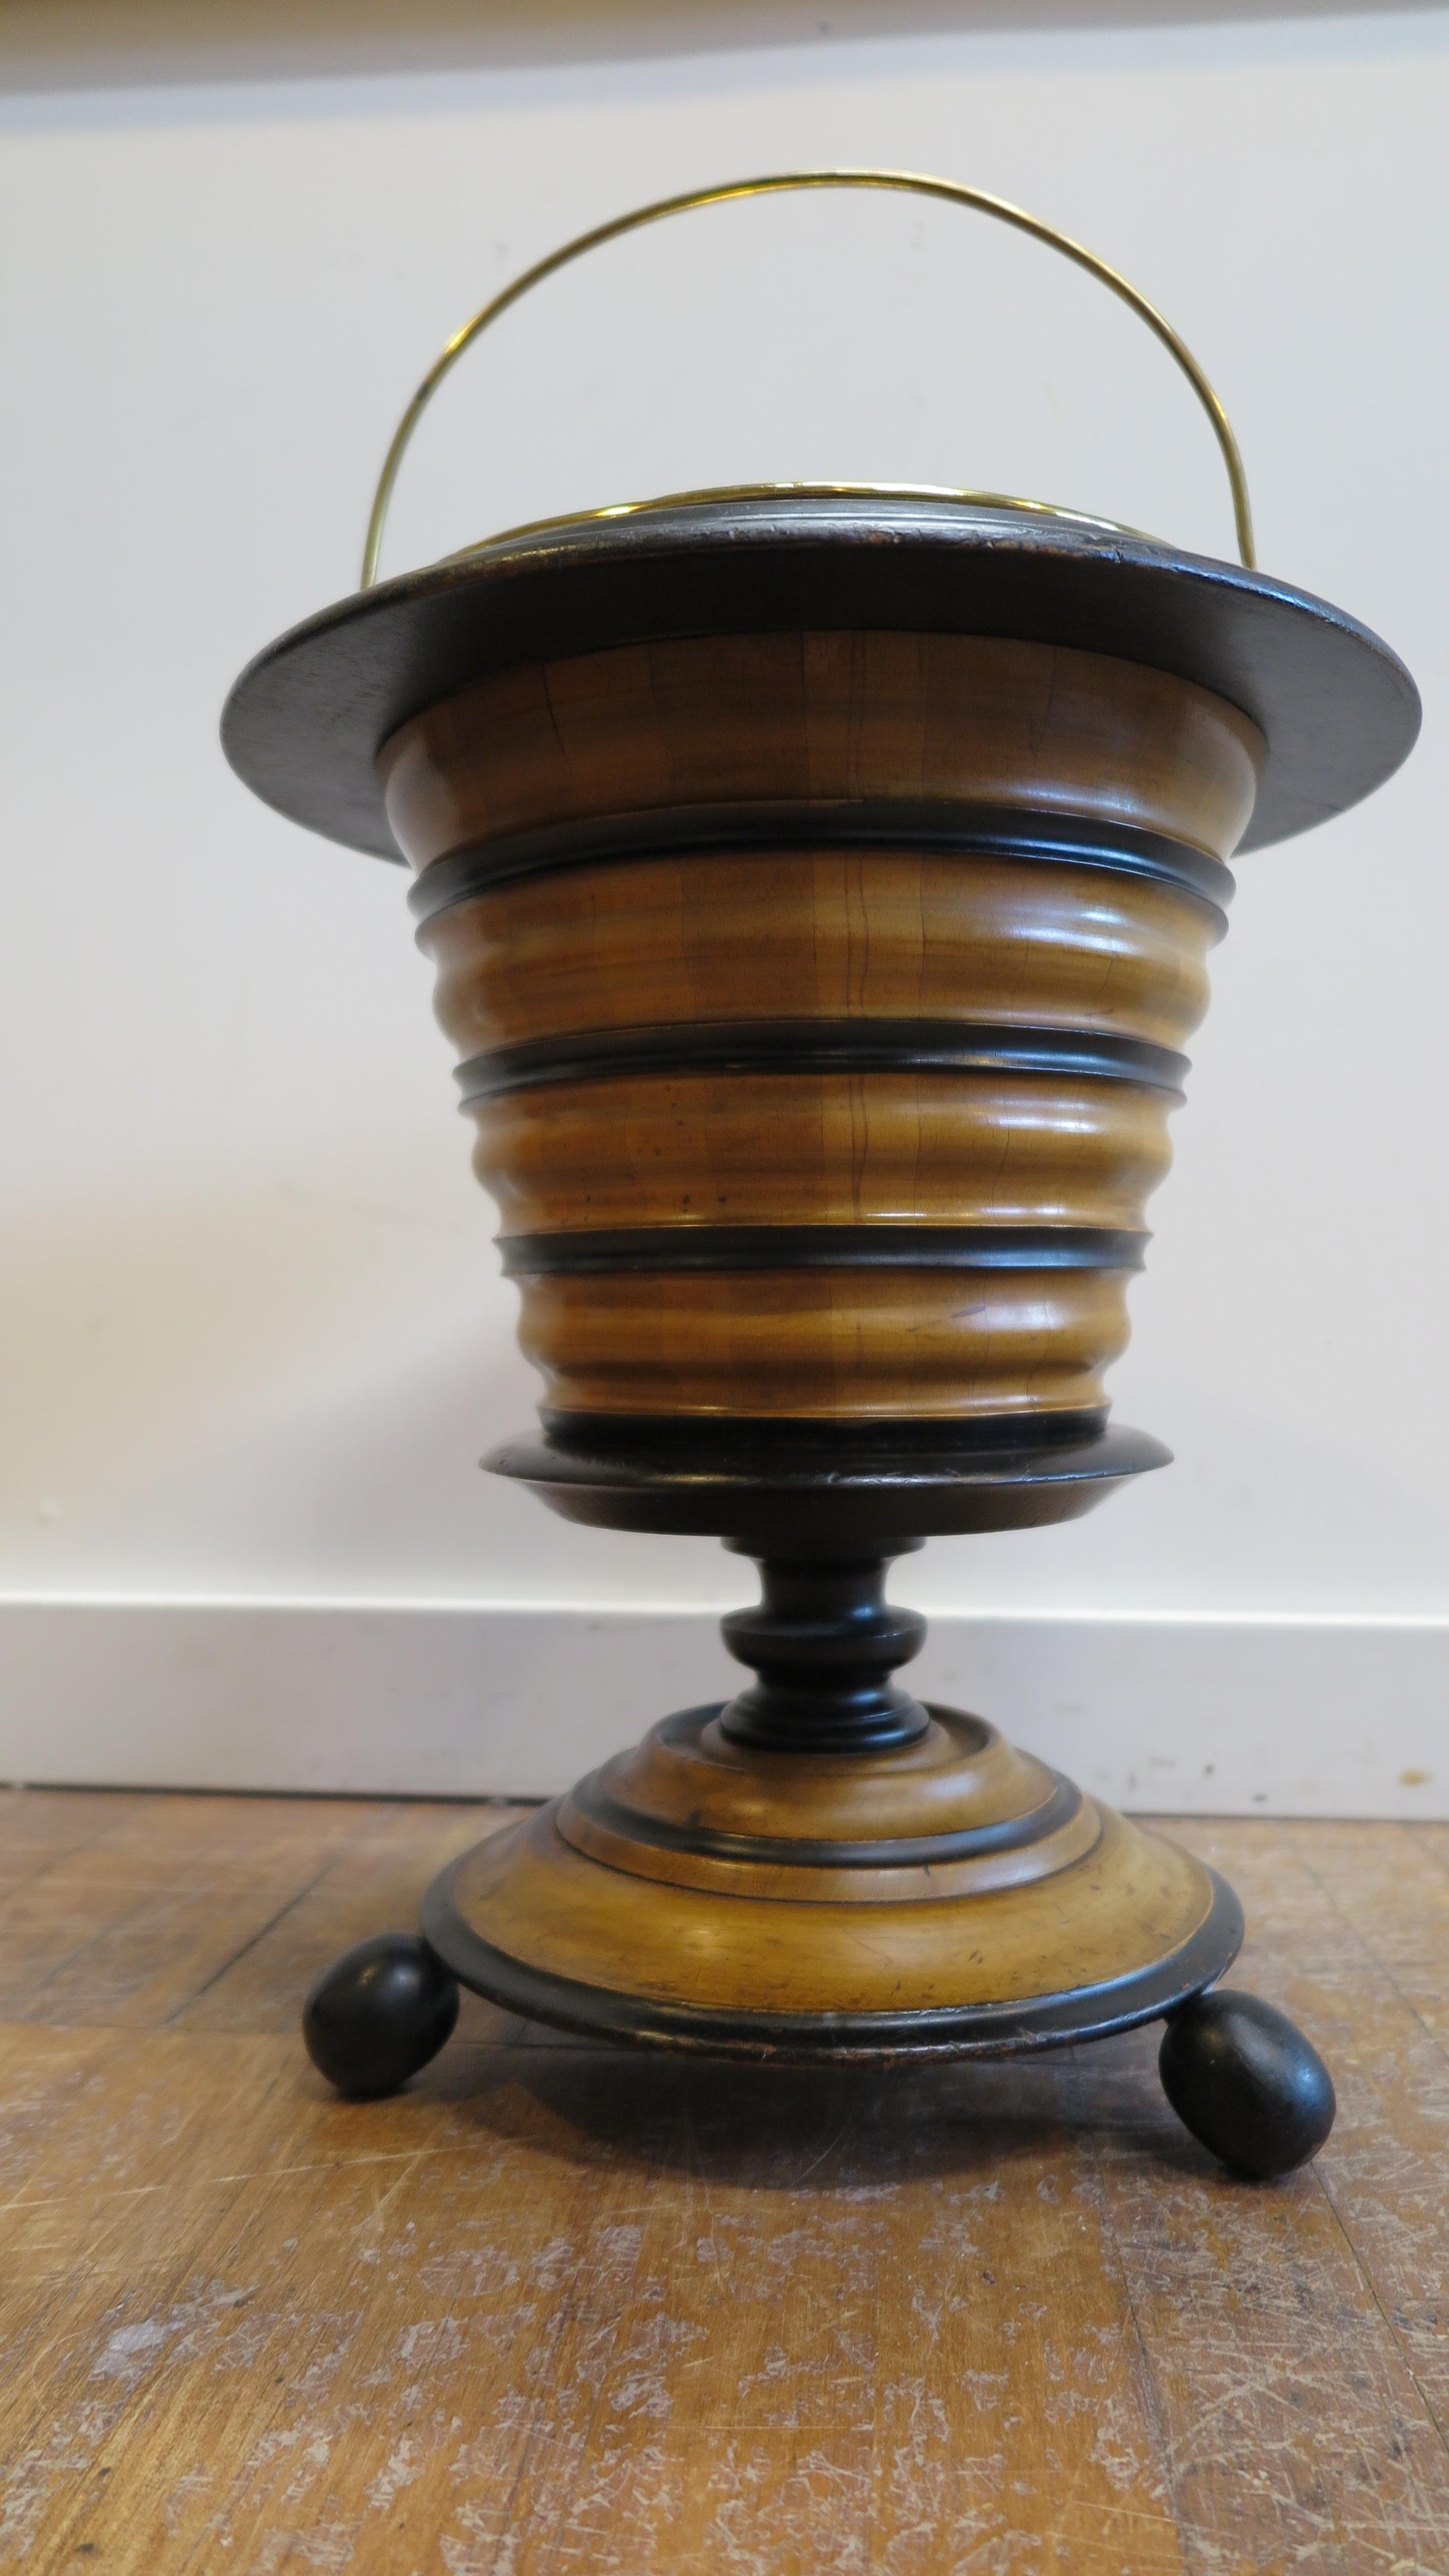 Antique European peat burner. Wonderfully constructed turned wood sections of light and dark having a removable brass bucket with handle. Very decorative in good condition. Some repairs over time are evident. Size is 14 D x 17.5 H with the handle